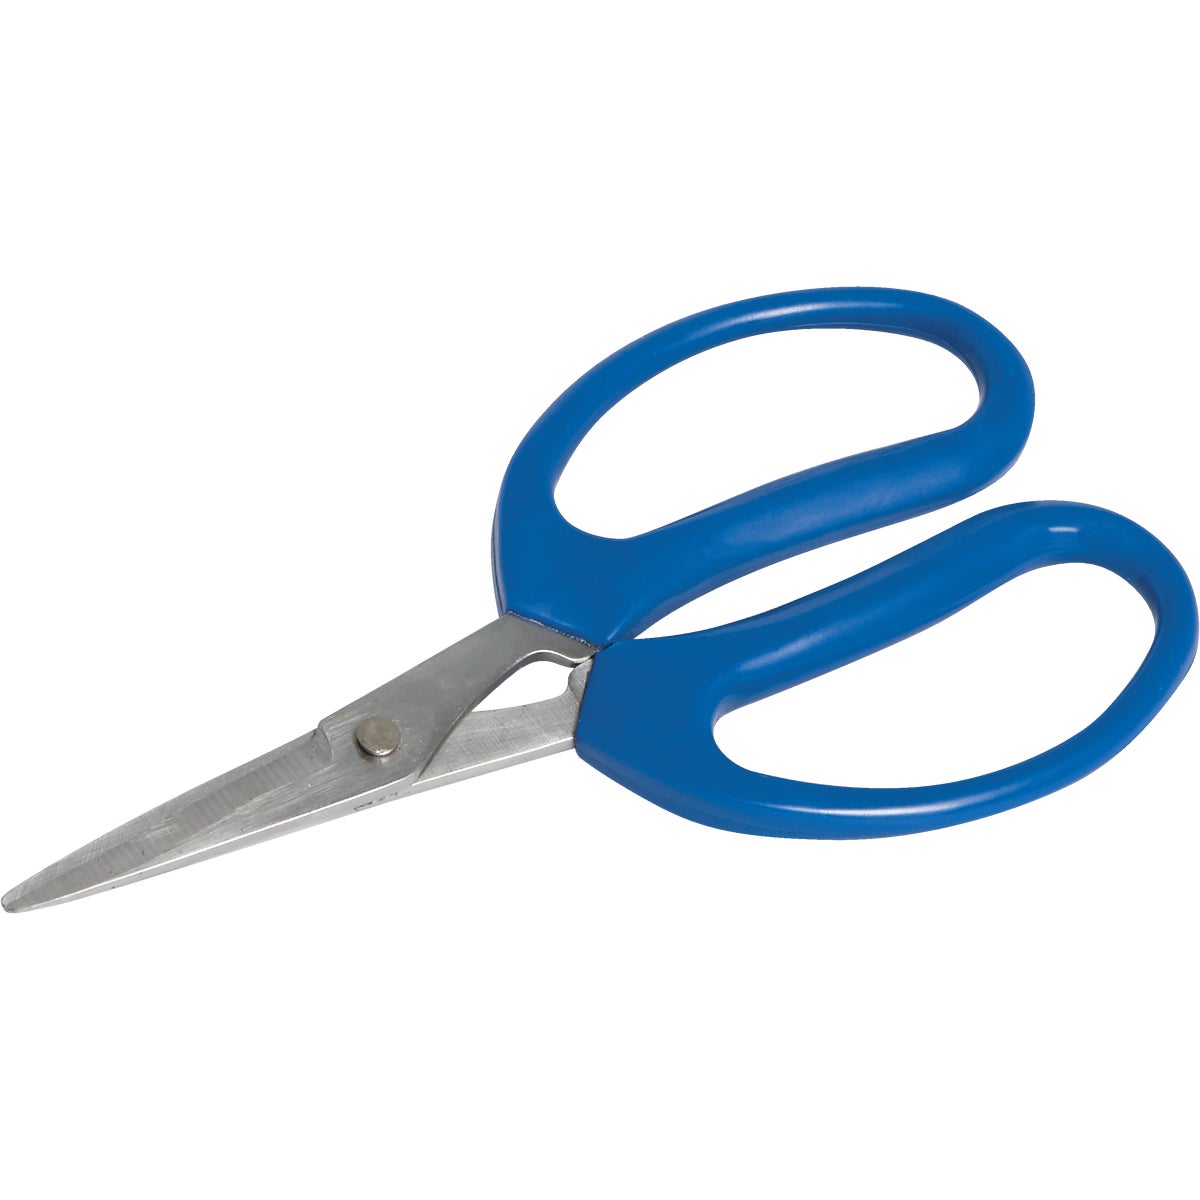 Item 703838, Straight pruner with scissor action for delicate and precise pruning.